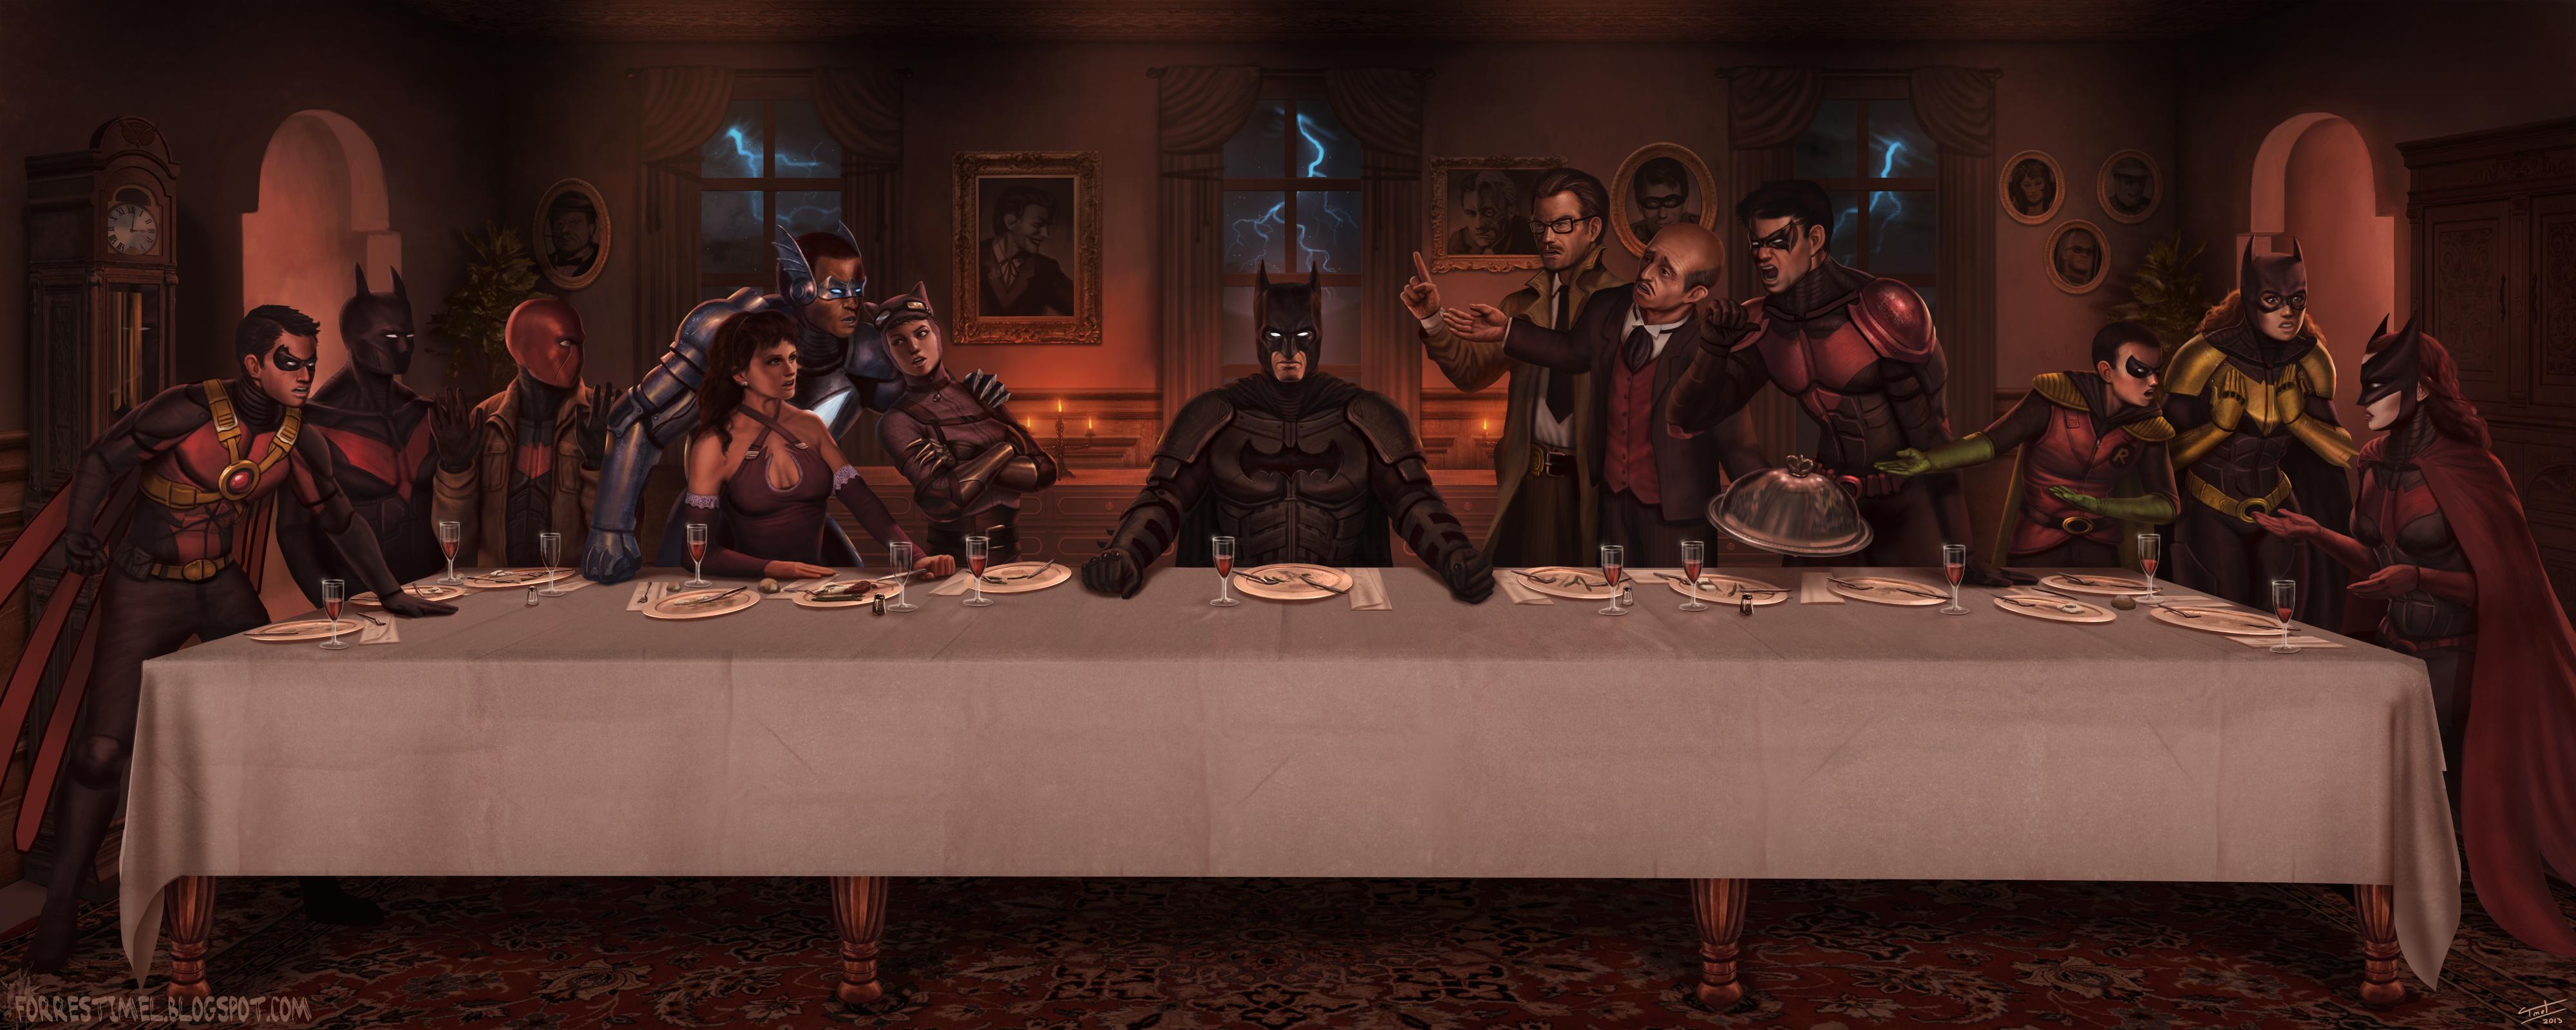 anime 12 Disciples Nightclubs The Last Supper HD Wallpapers  Desktop  and Mobile Images  Photos